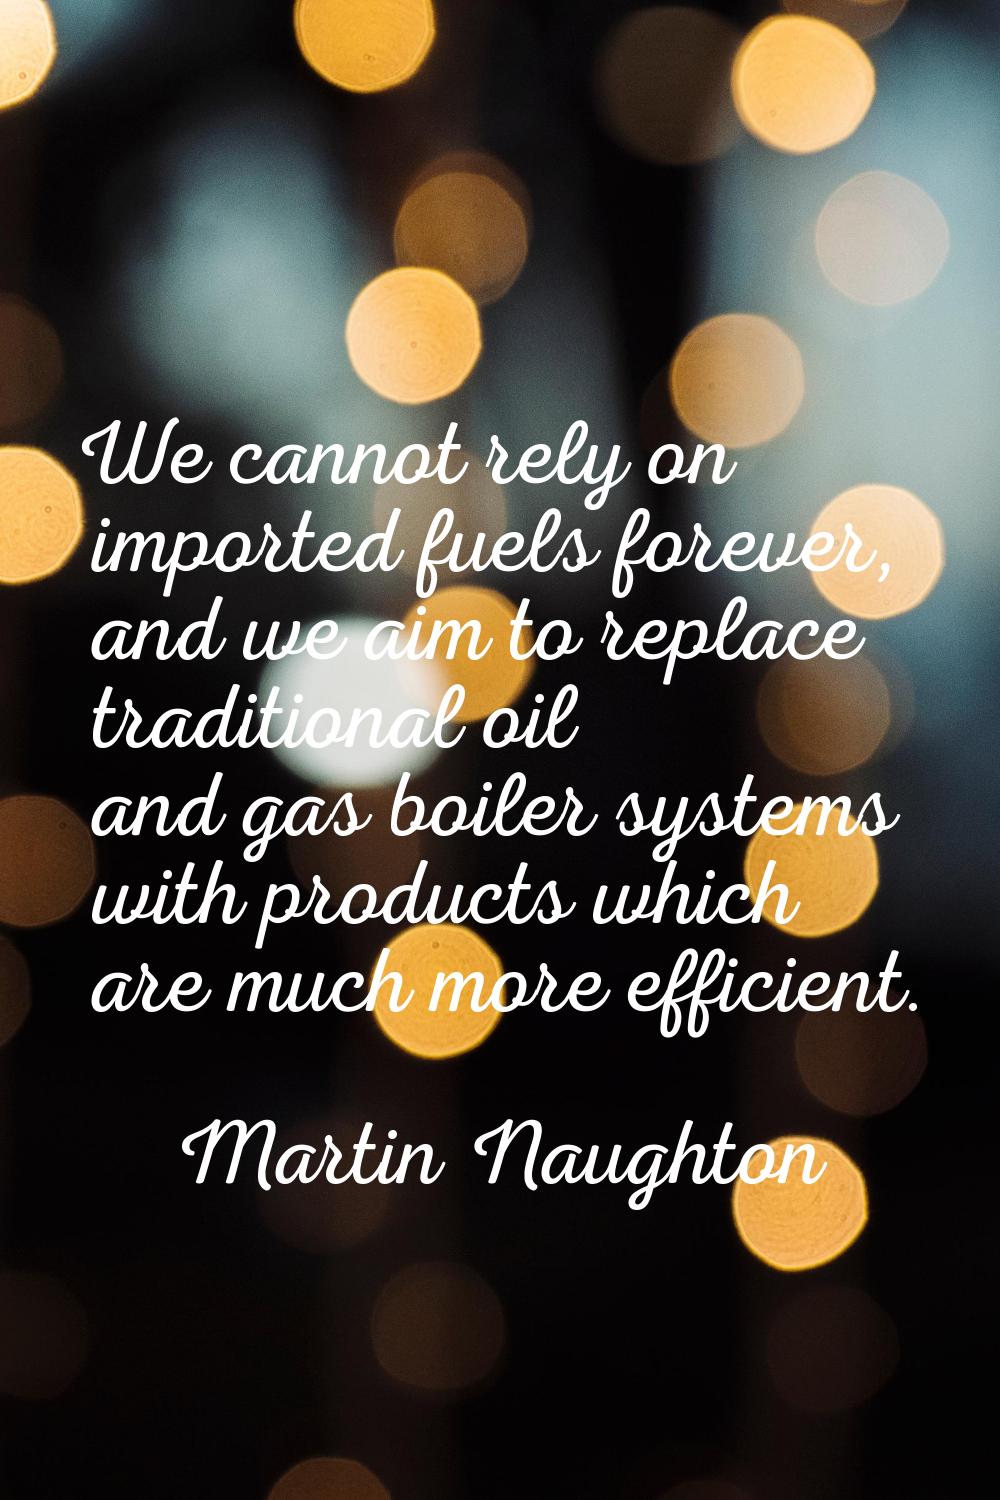 We cannot rely on imported fuels forever, and we aim to replace traditional oil and gas boiler syst